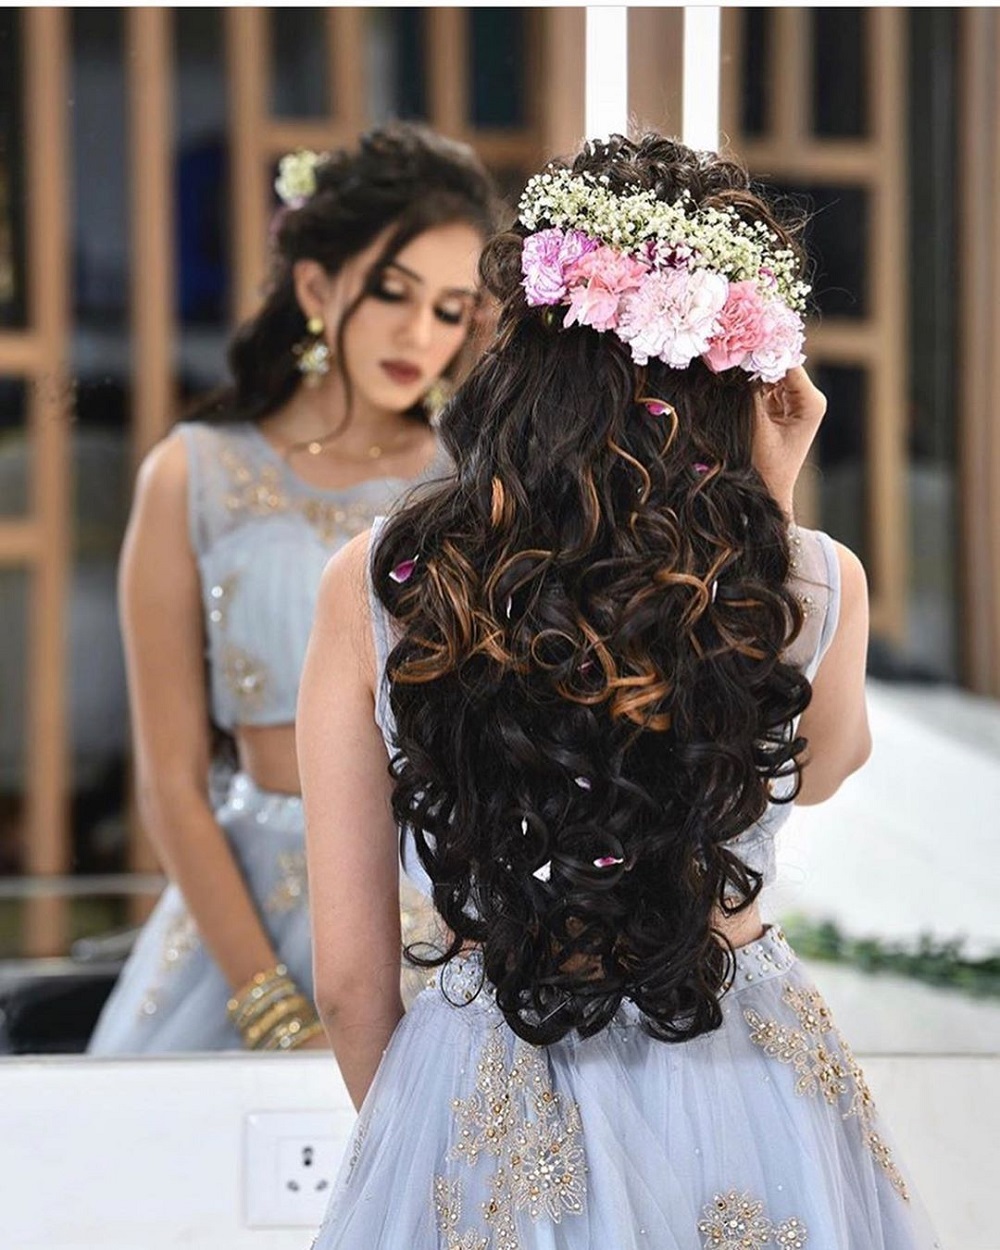 10 Super Chic Bridal Hairstyles for Long Faces Trending This Wedding Season